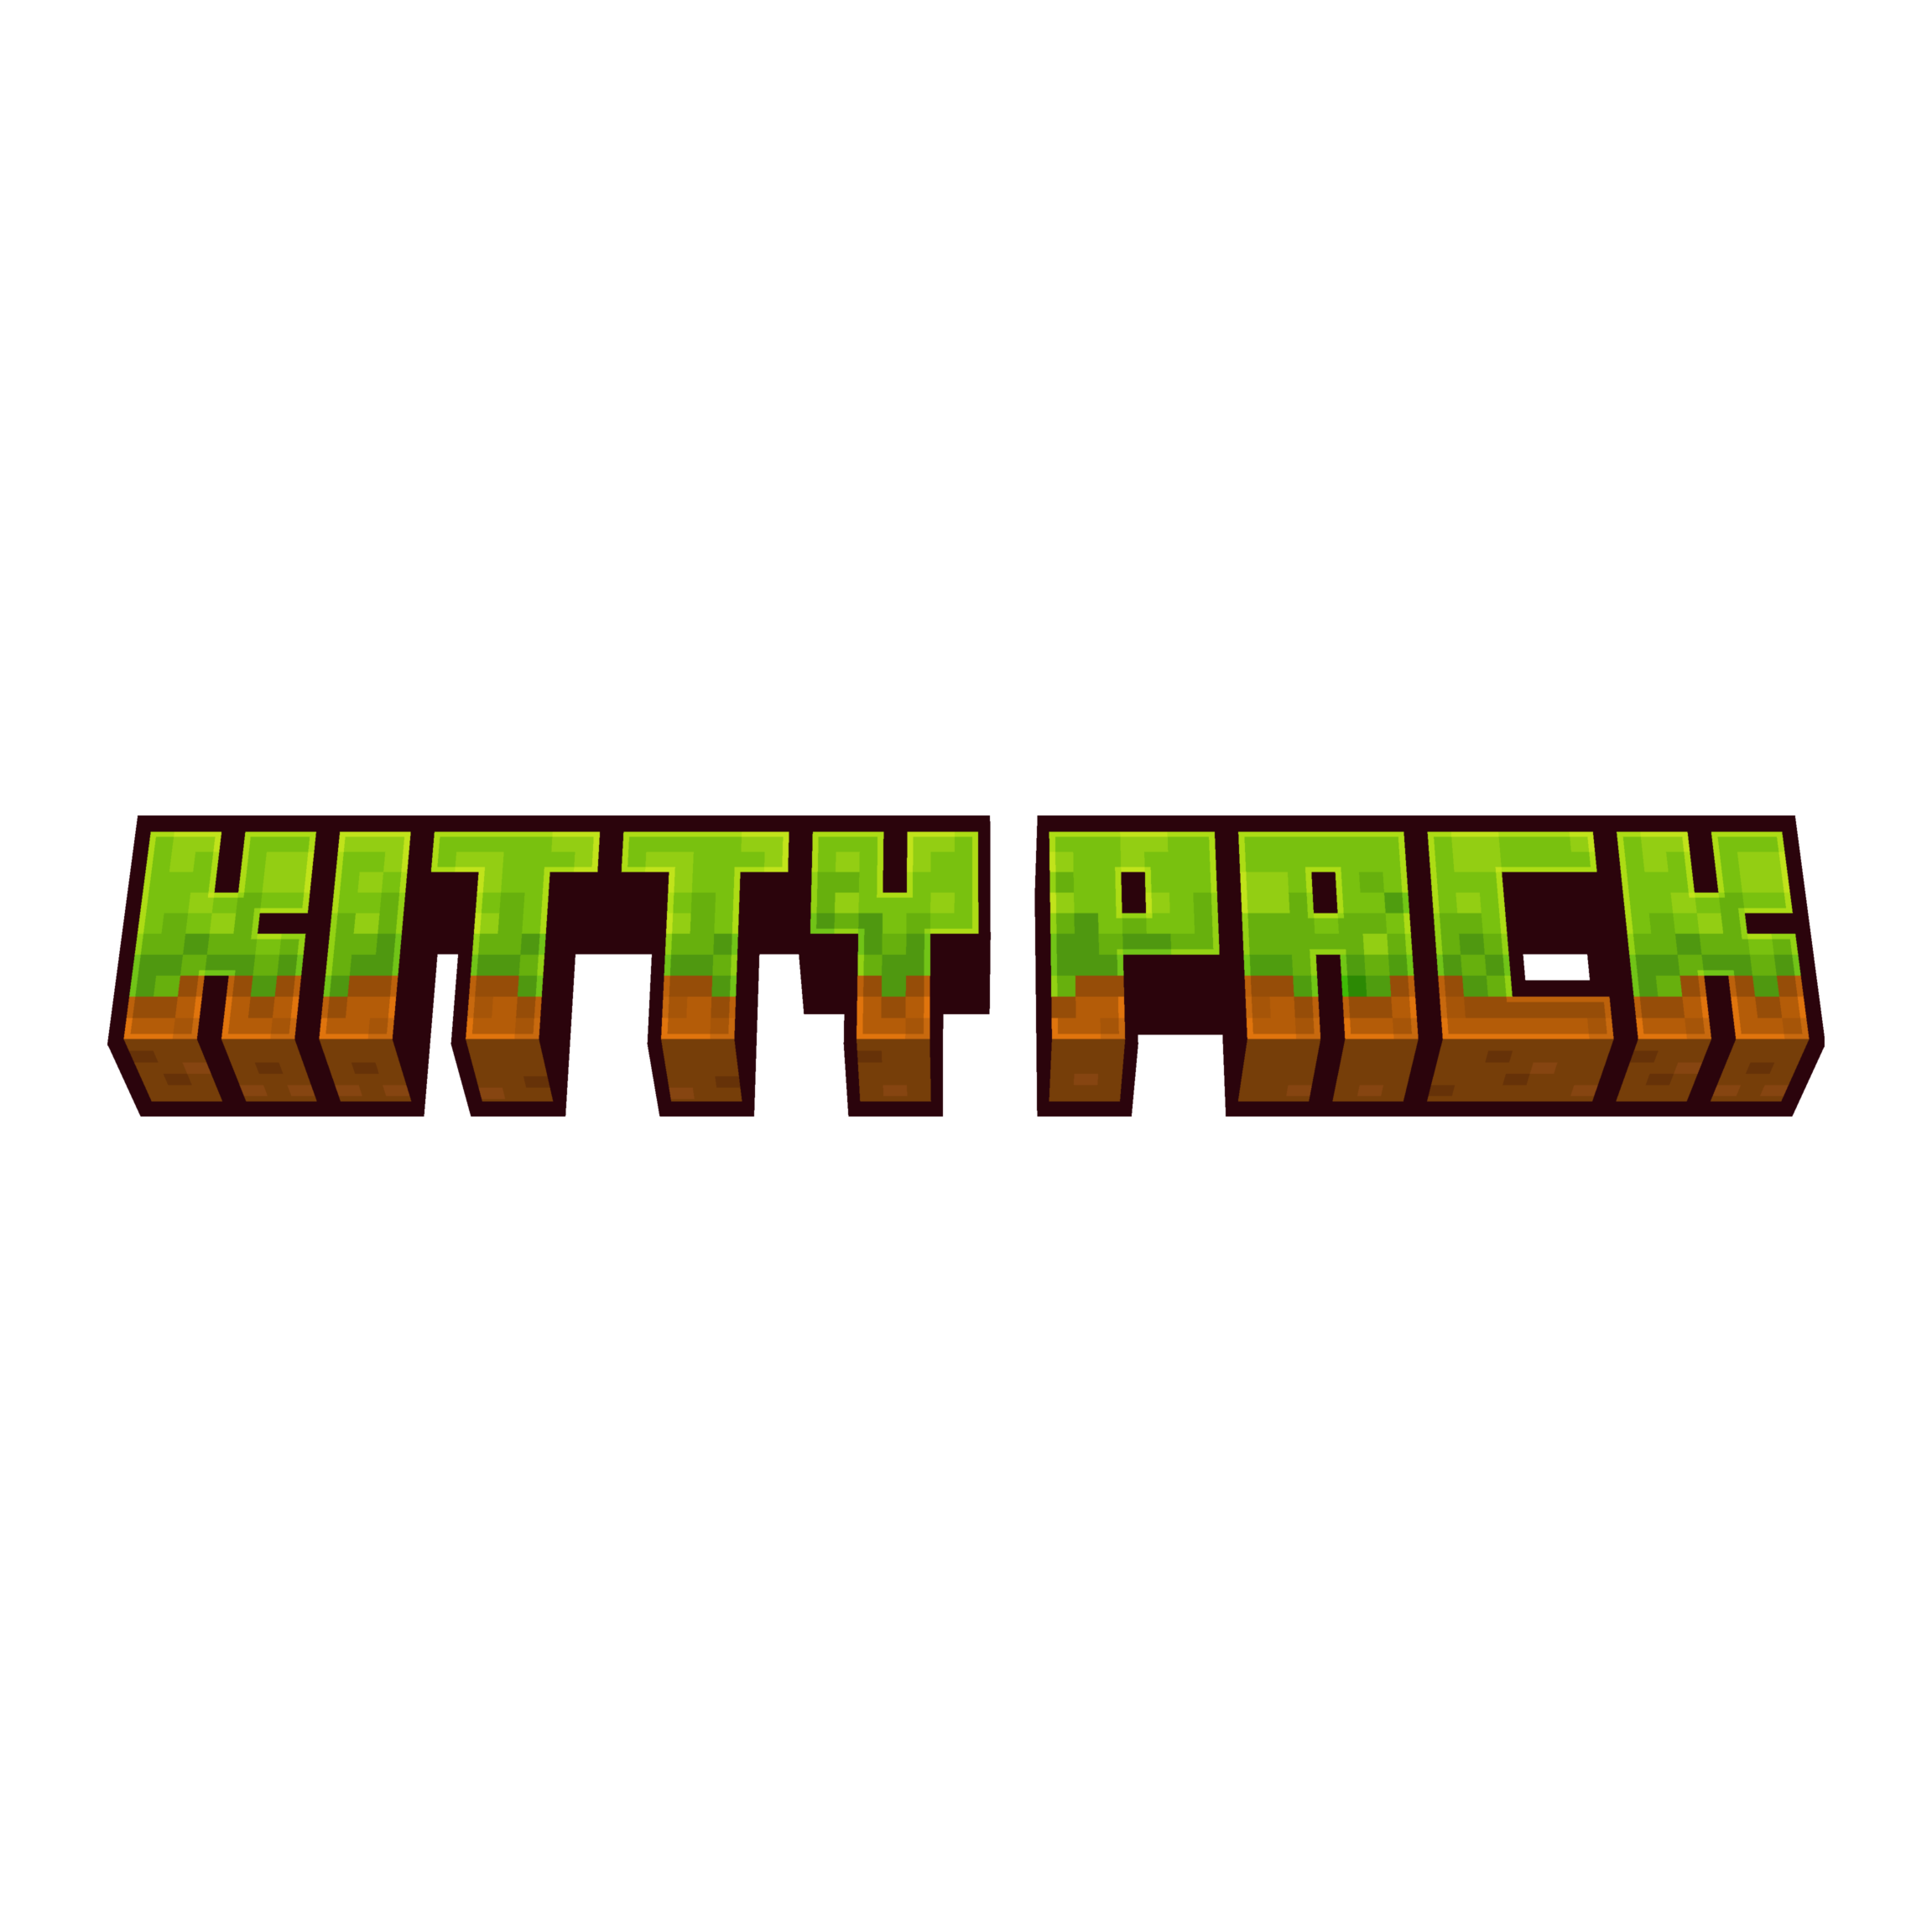 Kitty Pack